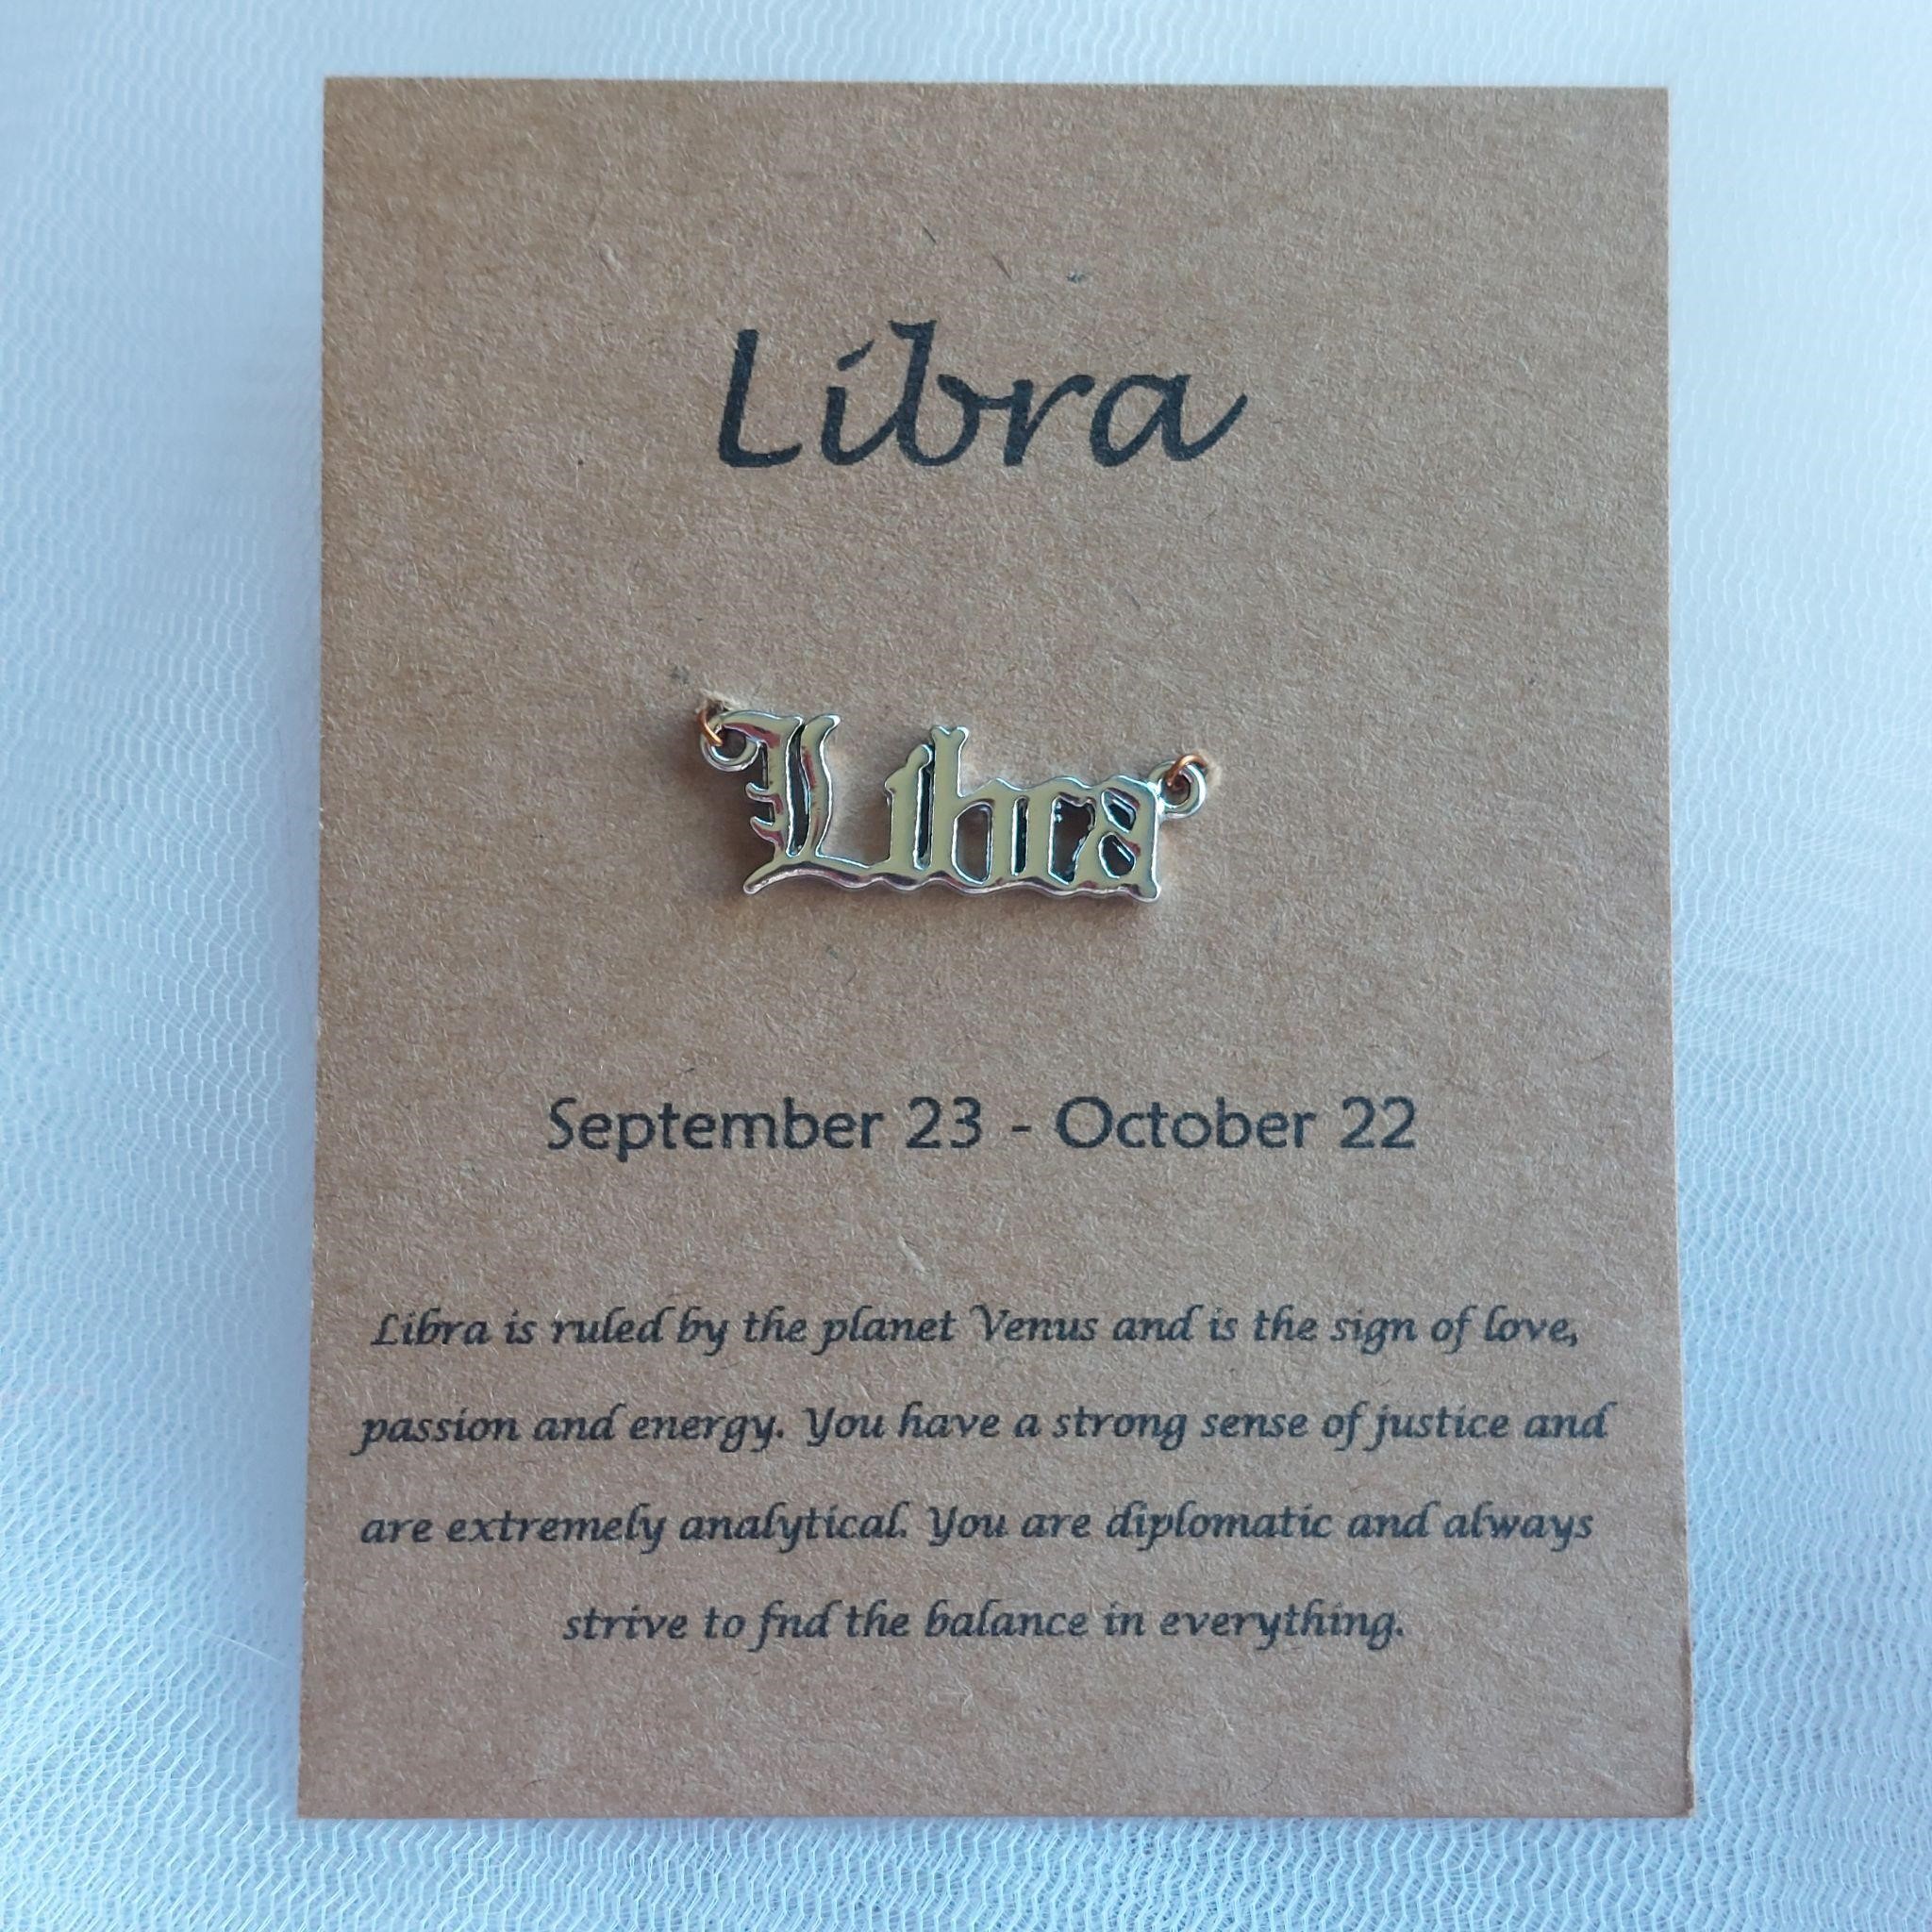 Libra - Astrology Necklace Charm